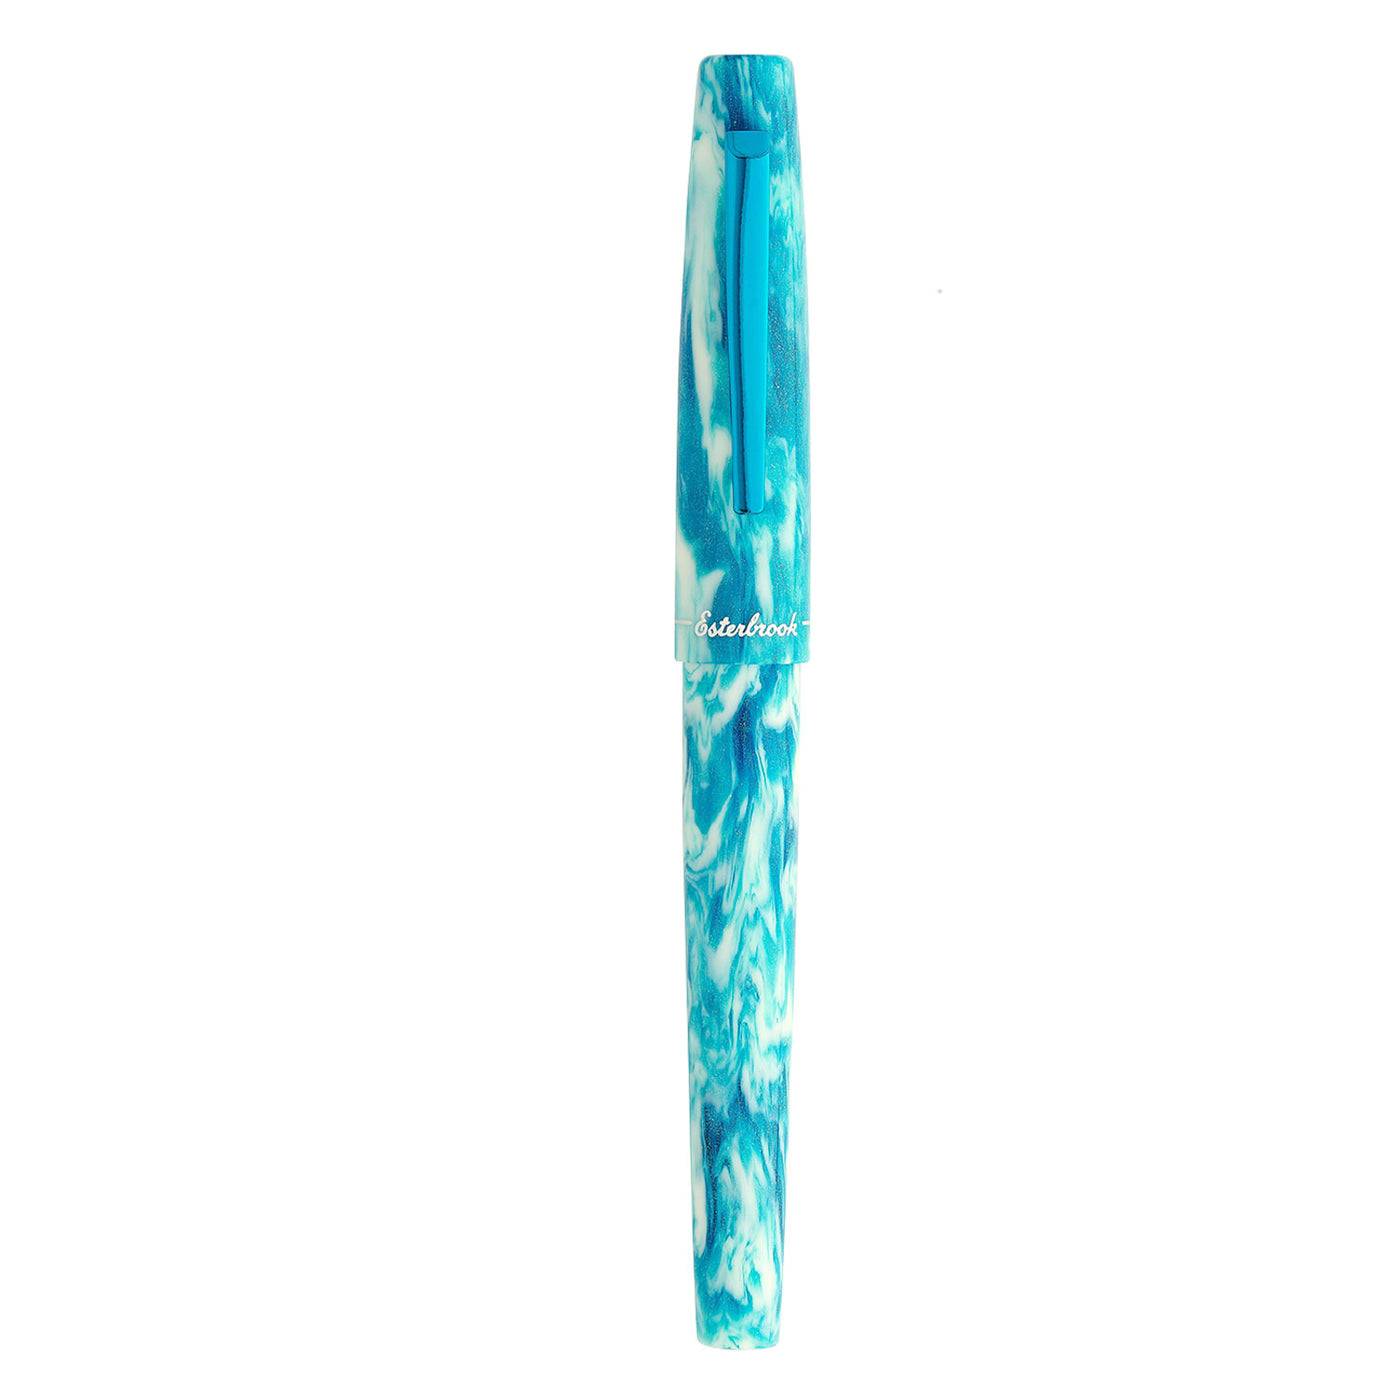 Esterbrook Camden Northern Lights Fountain Pen - Manitoba Blue (Limited Edition) 6